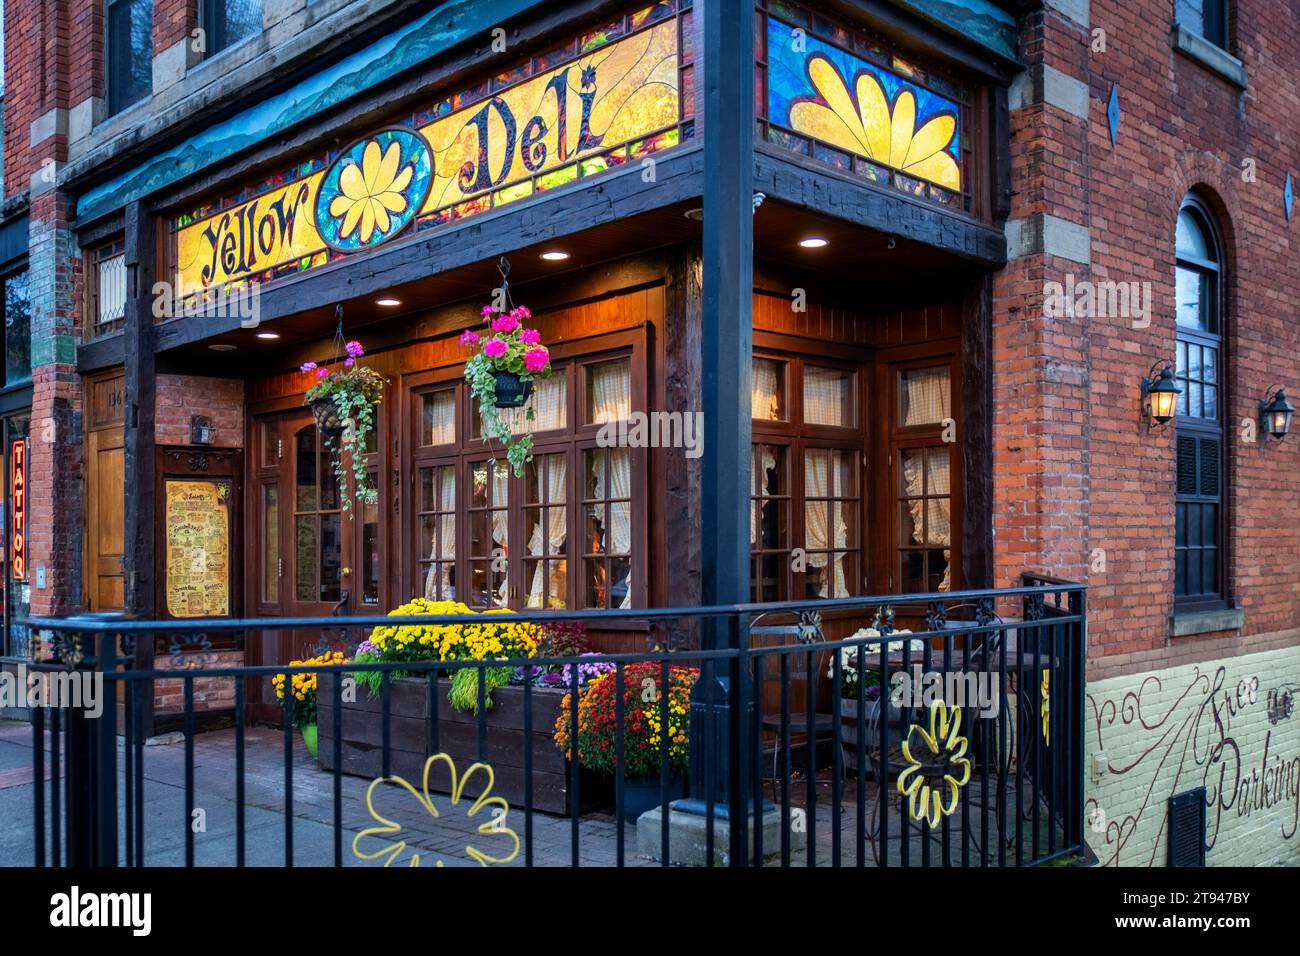 The popular Yellow Deli is one of many charming businesses along Main Street, Oneonta. Stock Photo